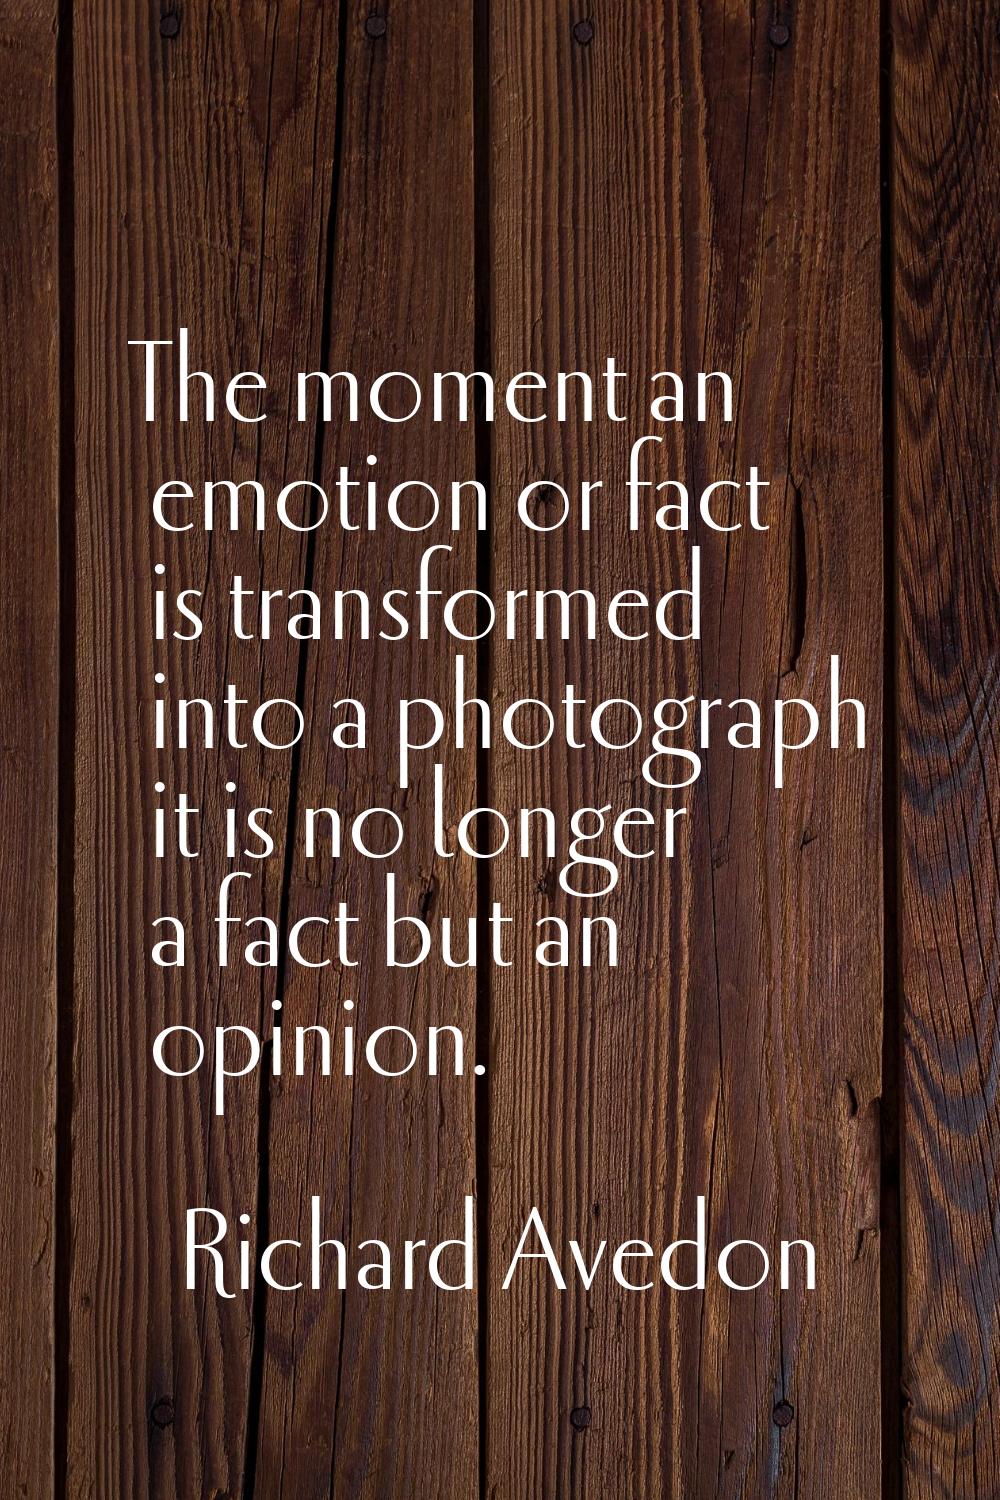 The moment an emotion or fact is transformed into a photograph it is no longer a fact but an opinio